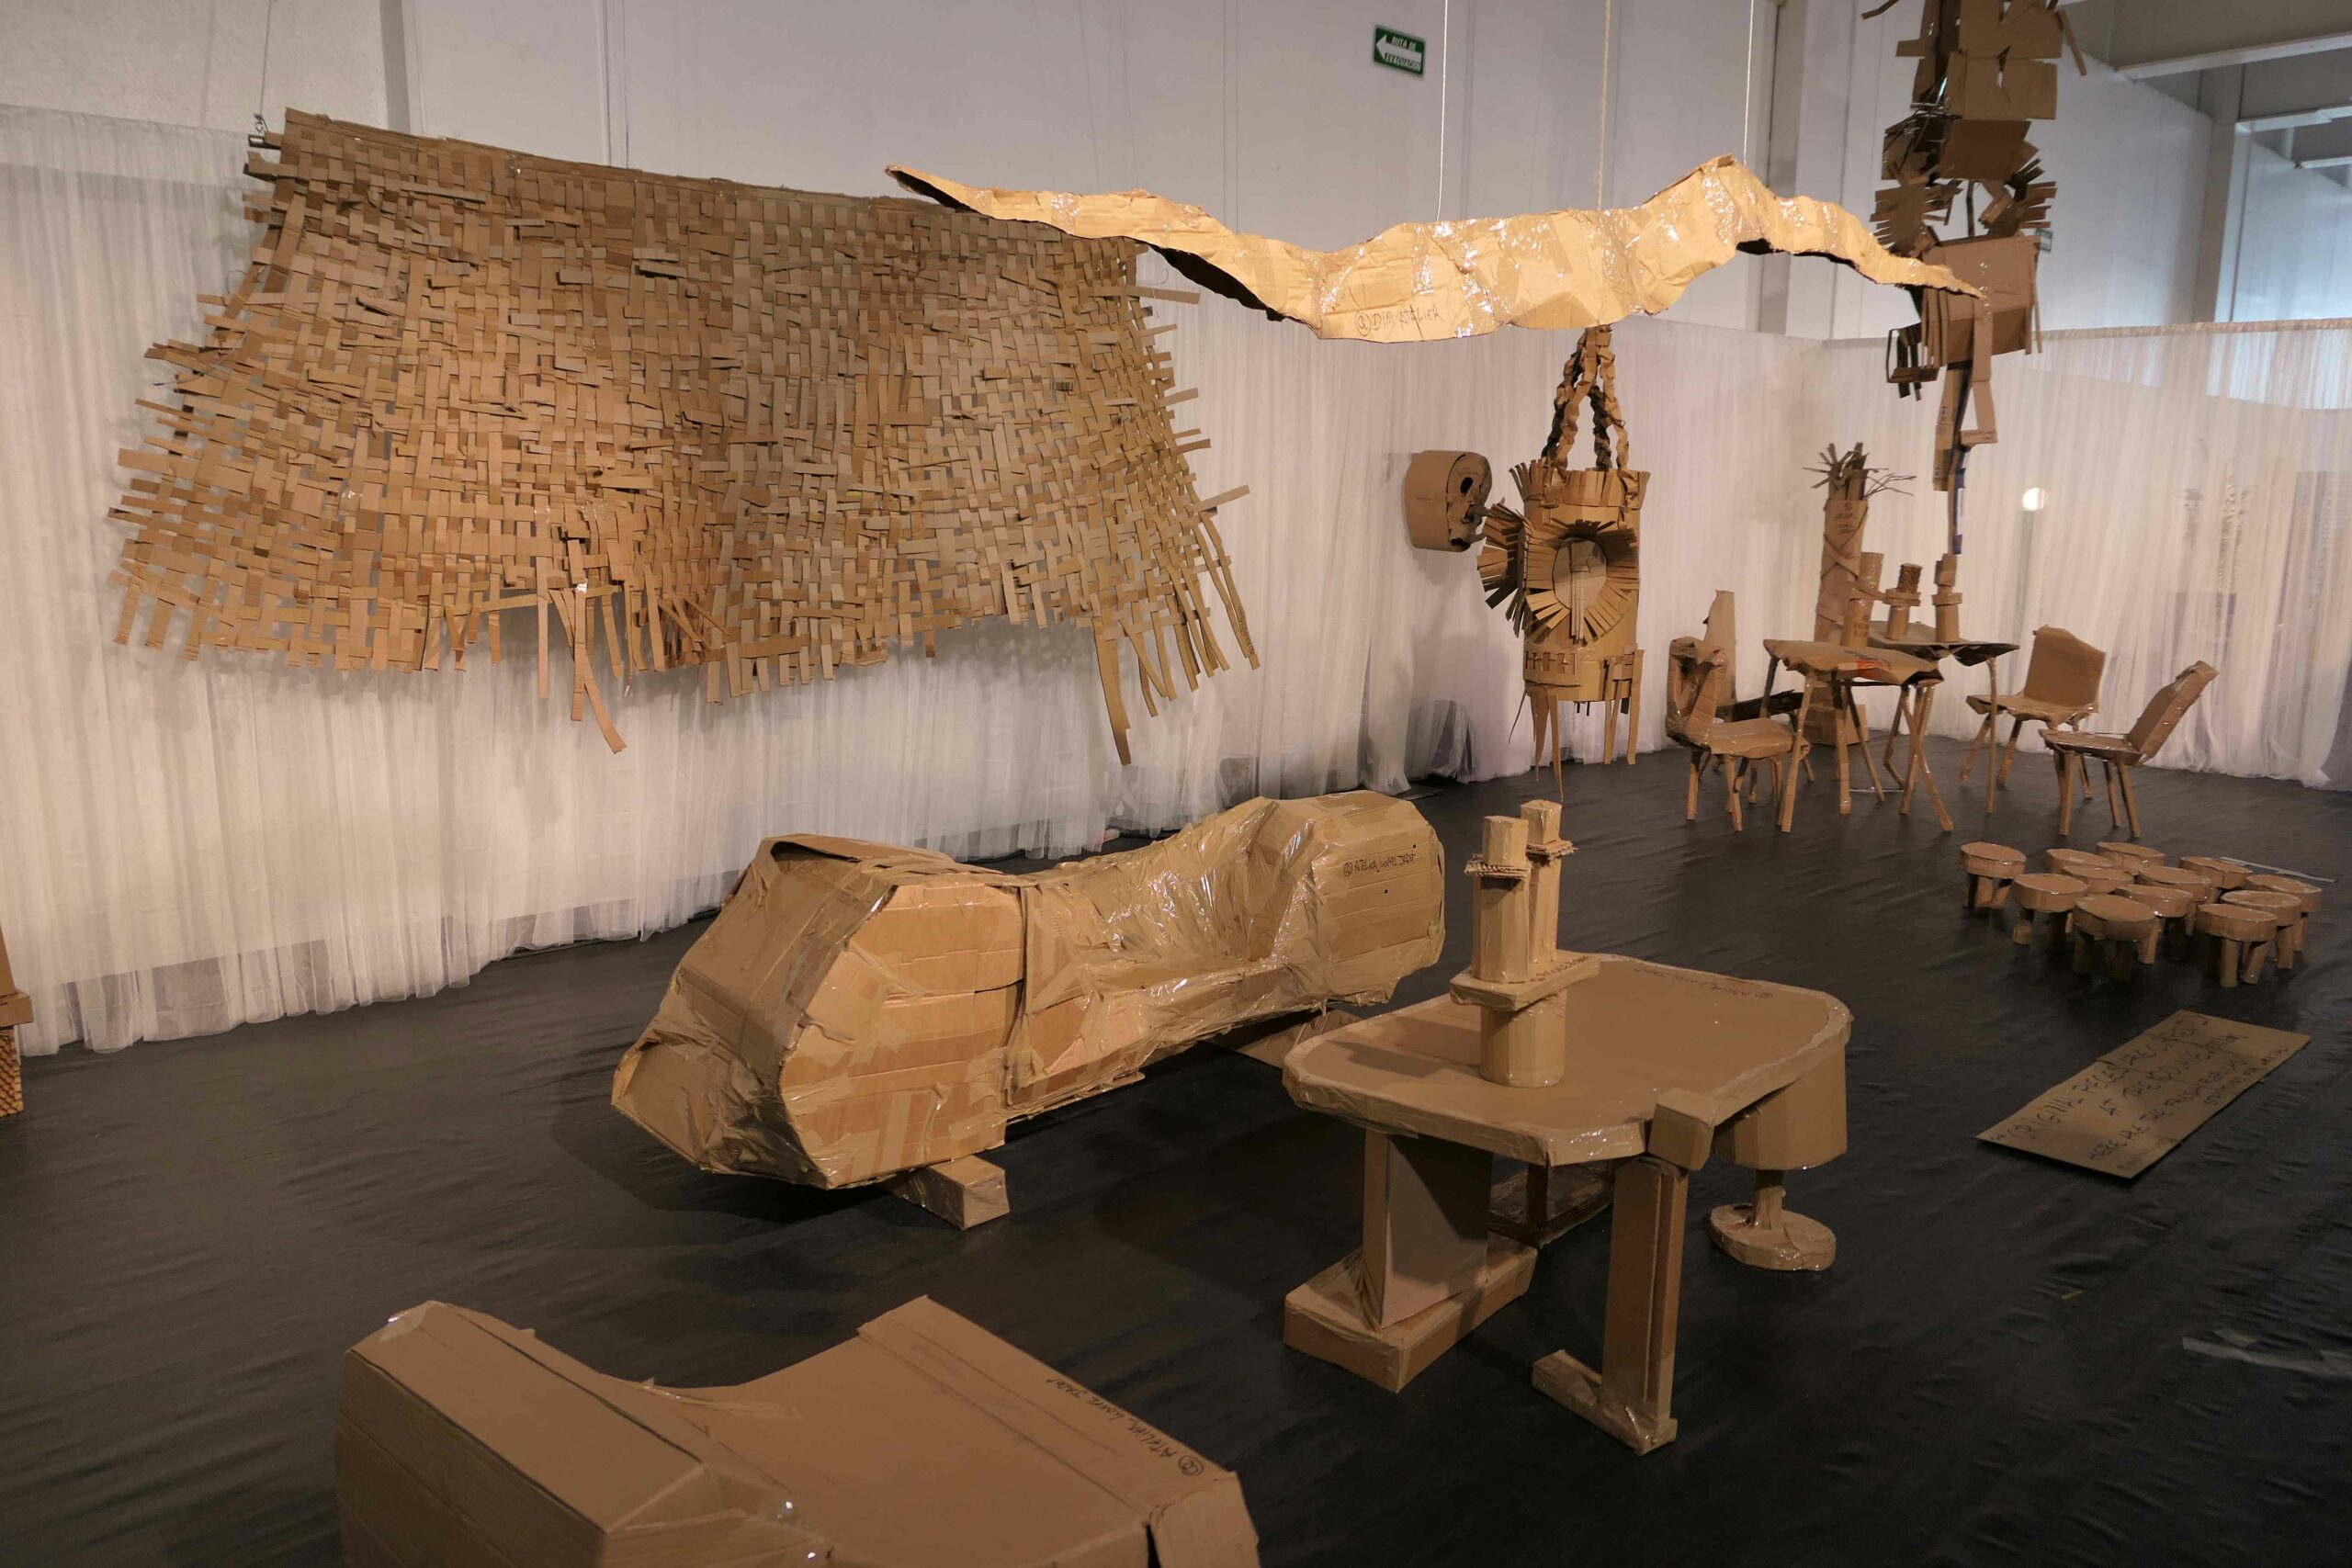 A room full of cardboard and tape sculptures. Some sculptures are abstract, some are furniture, such as chairs, tables and coffee tables. on the back wall is a large woven tapestry, also made from cardboard